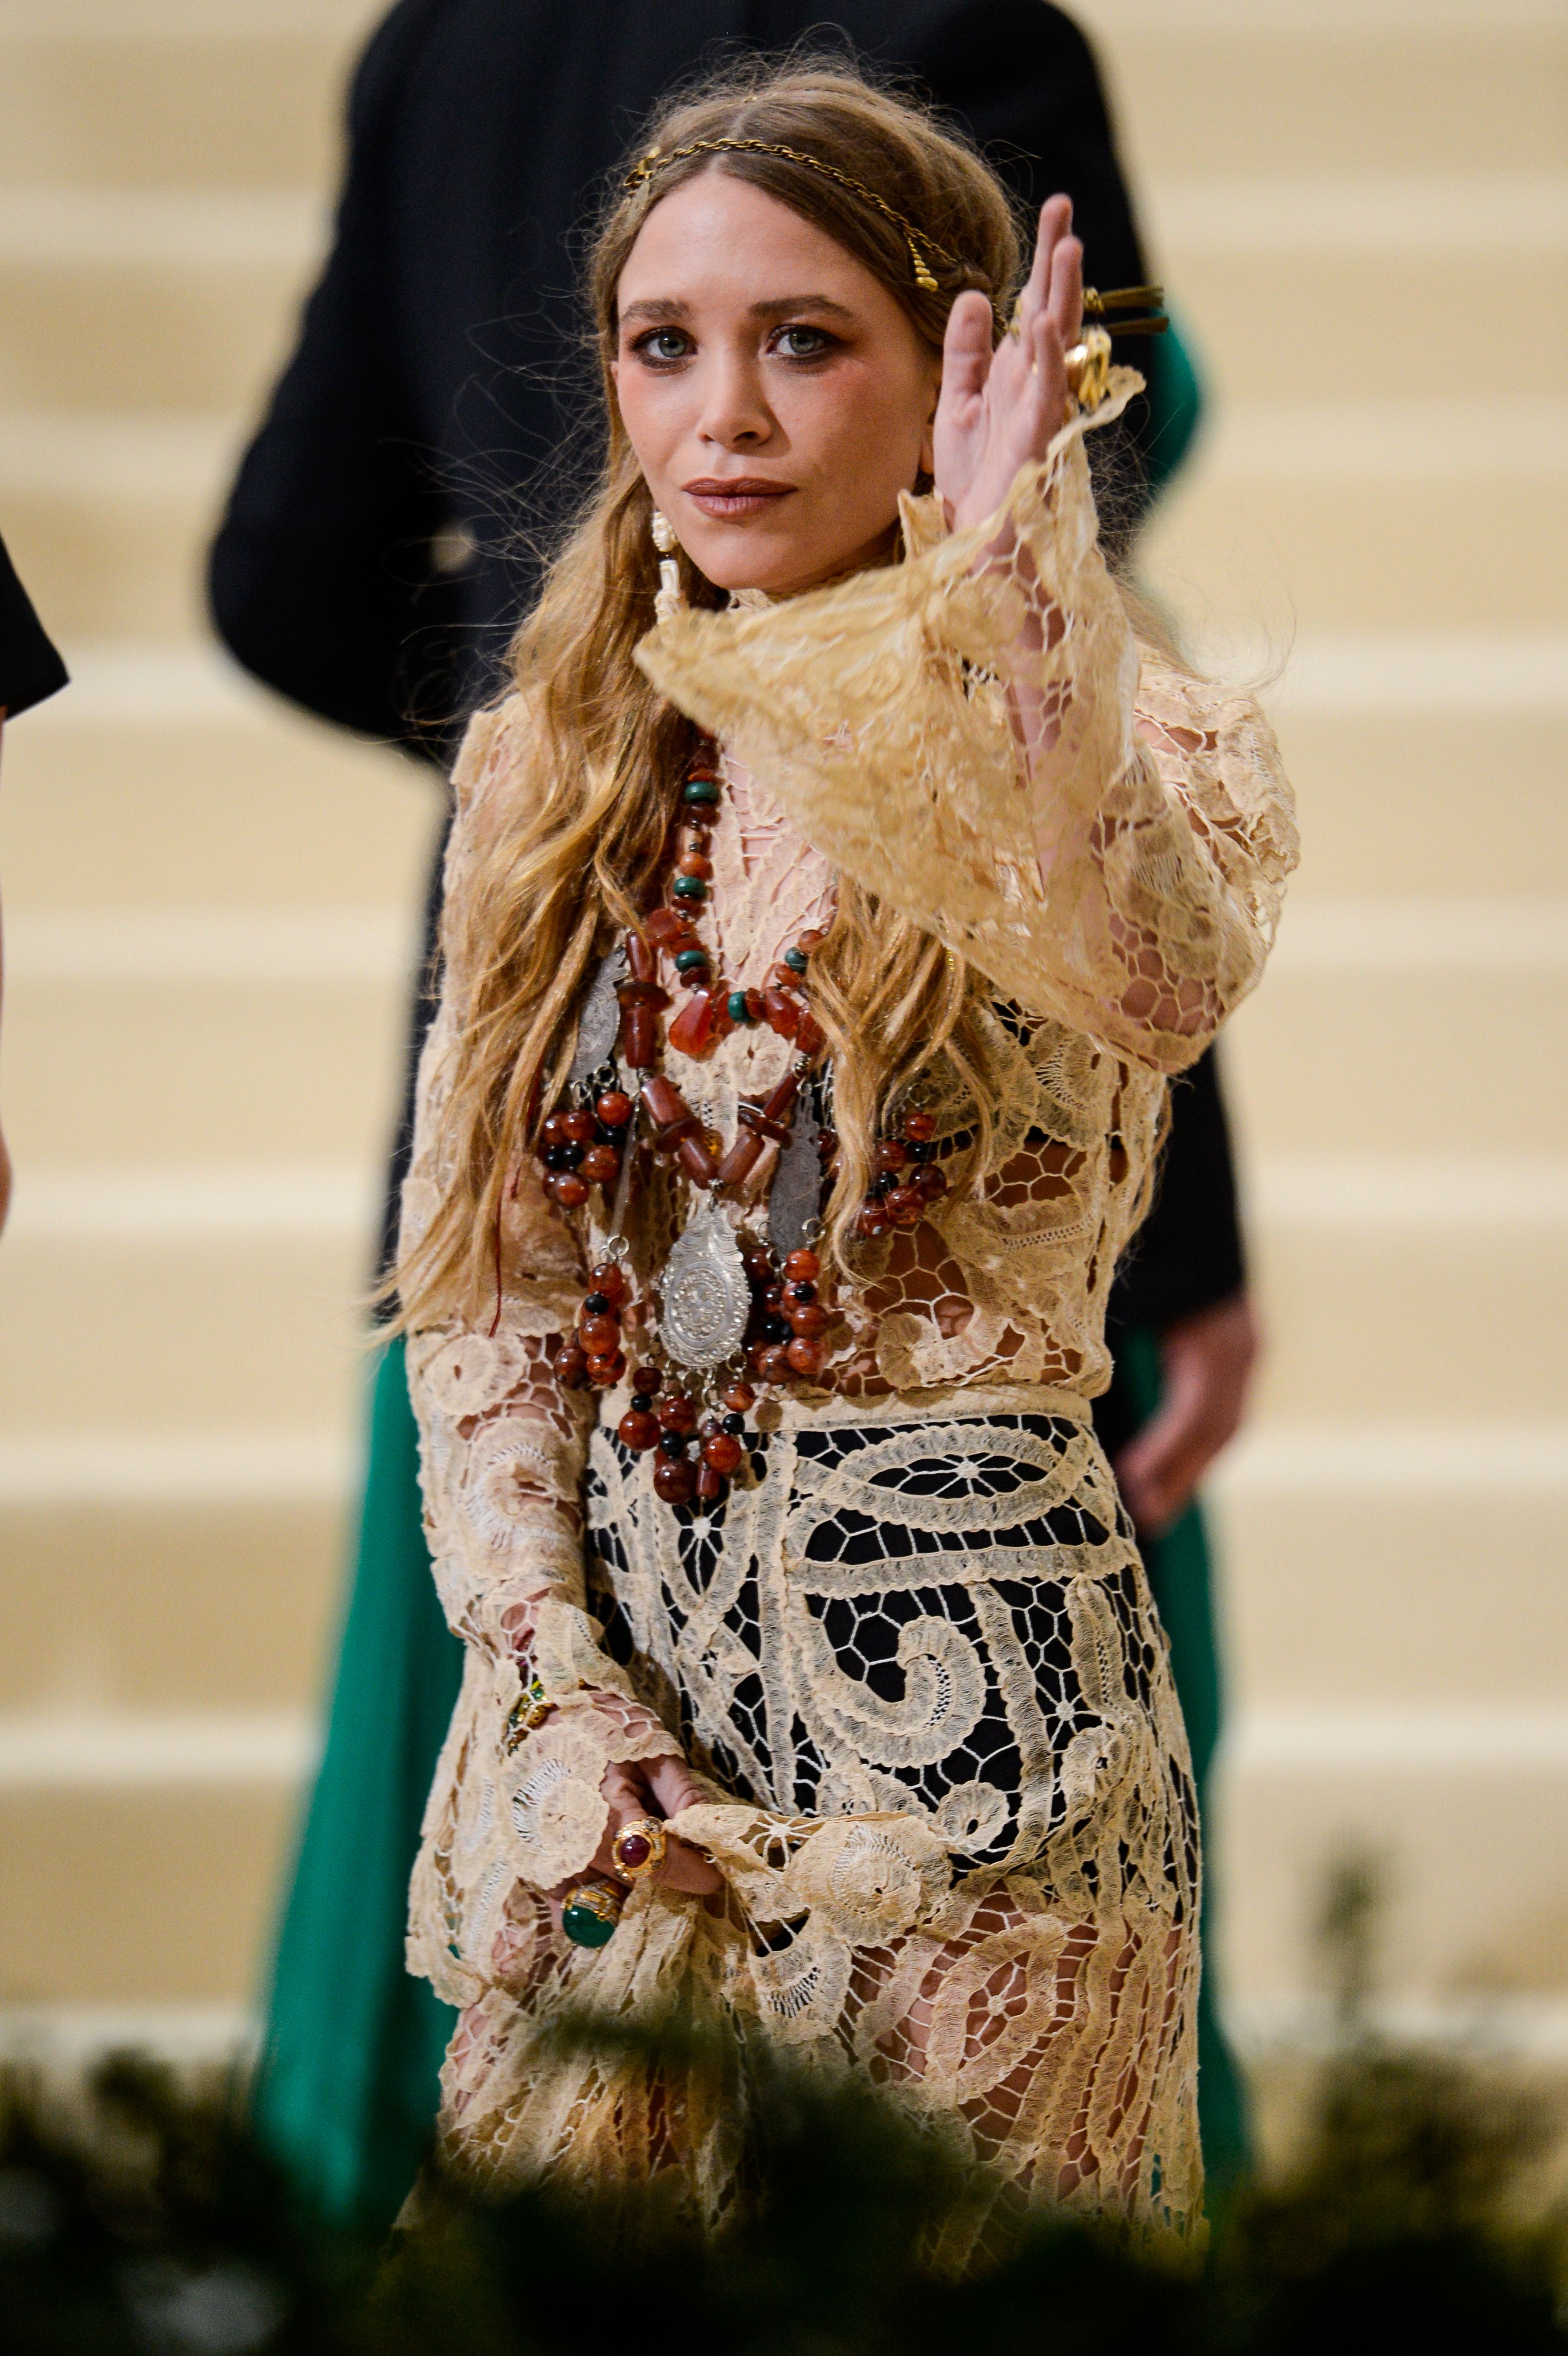 Mary-Kate Olsen ar the Rei Kawakubo/Comme des Garcons: Art Of The In-Between" Costume Institute Gala at the Metropolitan Museum of Art on May 01, 2017 in New York City.  | Photo: Getty Images